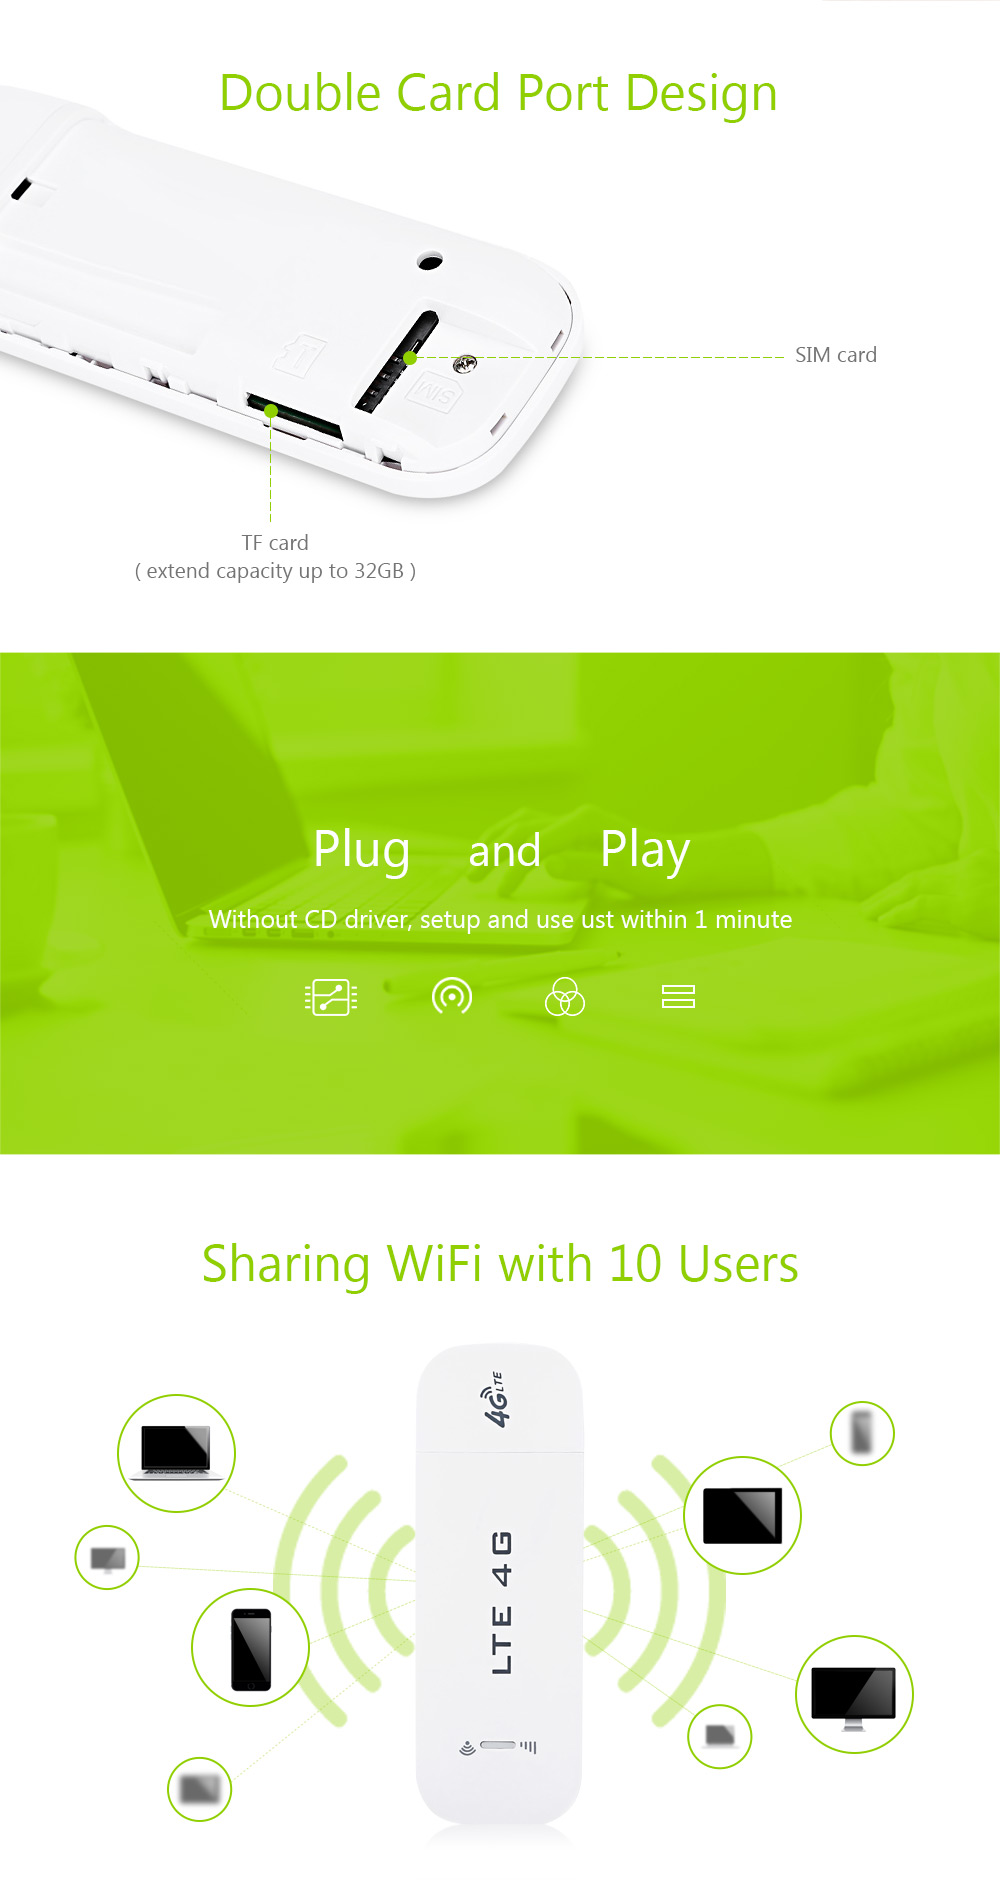 3G4G-Wifi-Wireless-Router-LTE-100M-SIM-Card-USB-Modem-Dongle-White-Fast-Speed-WiFi-Connection--Devic-1510908-2